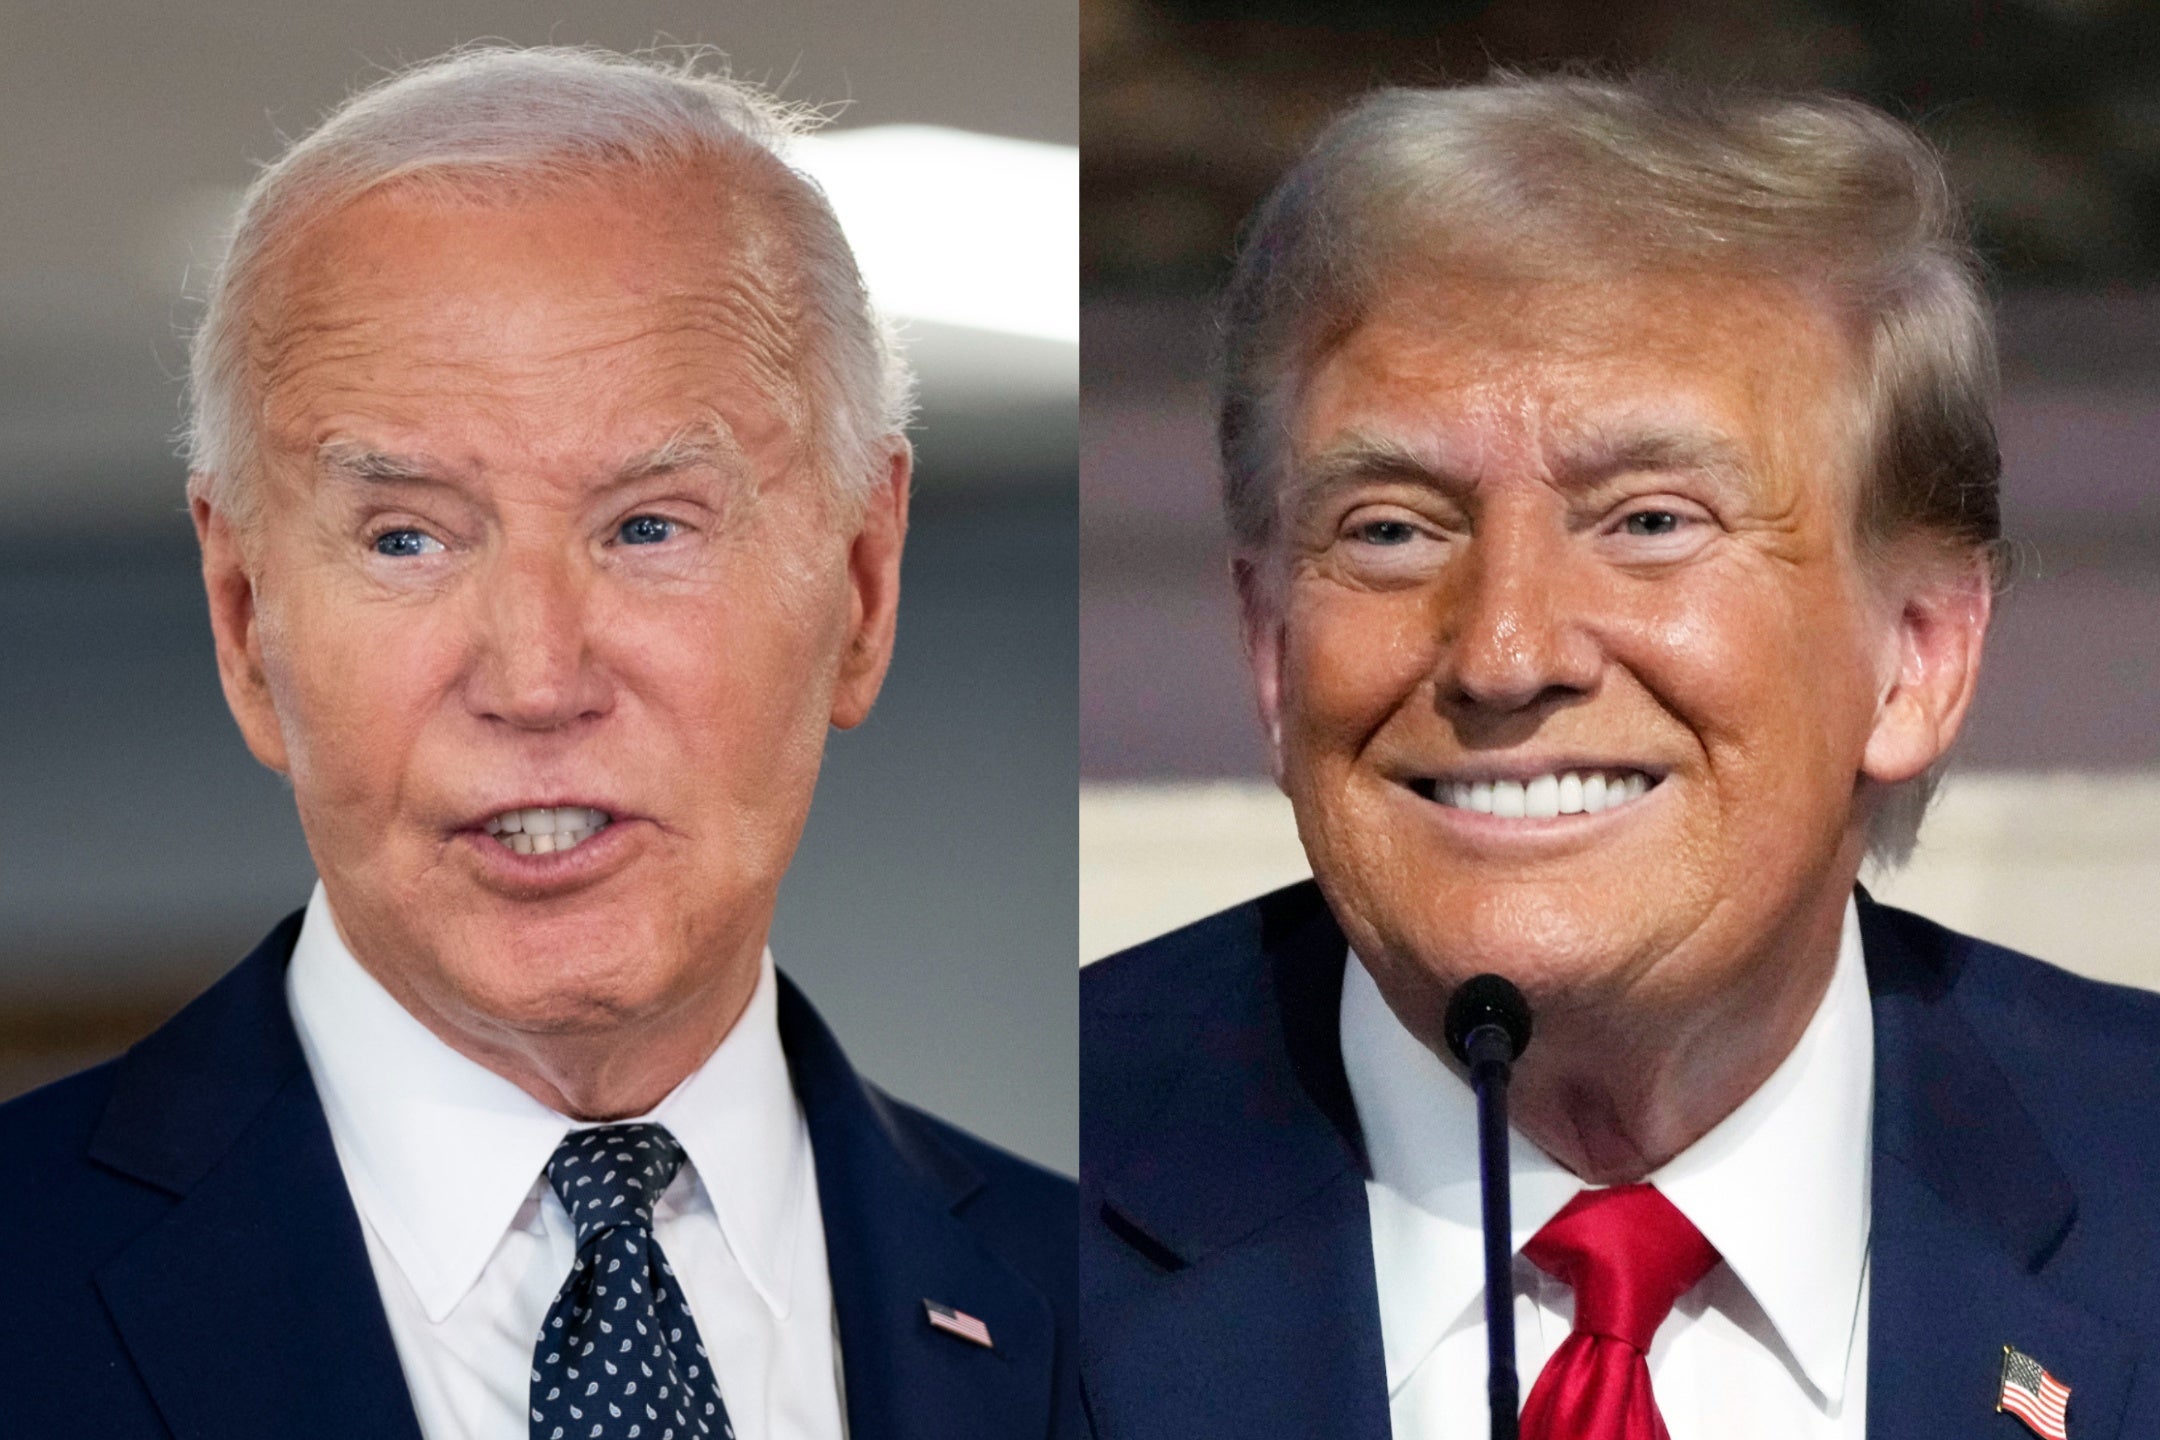 Donald Trump leads Joe Biden in several swing states after the first presidential debate